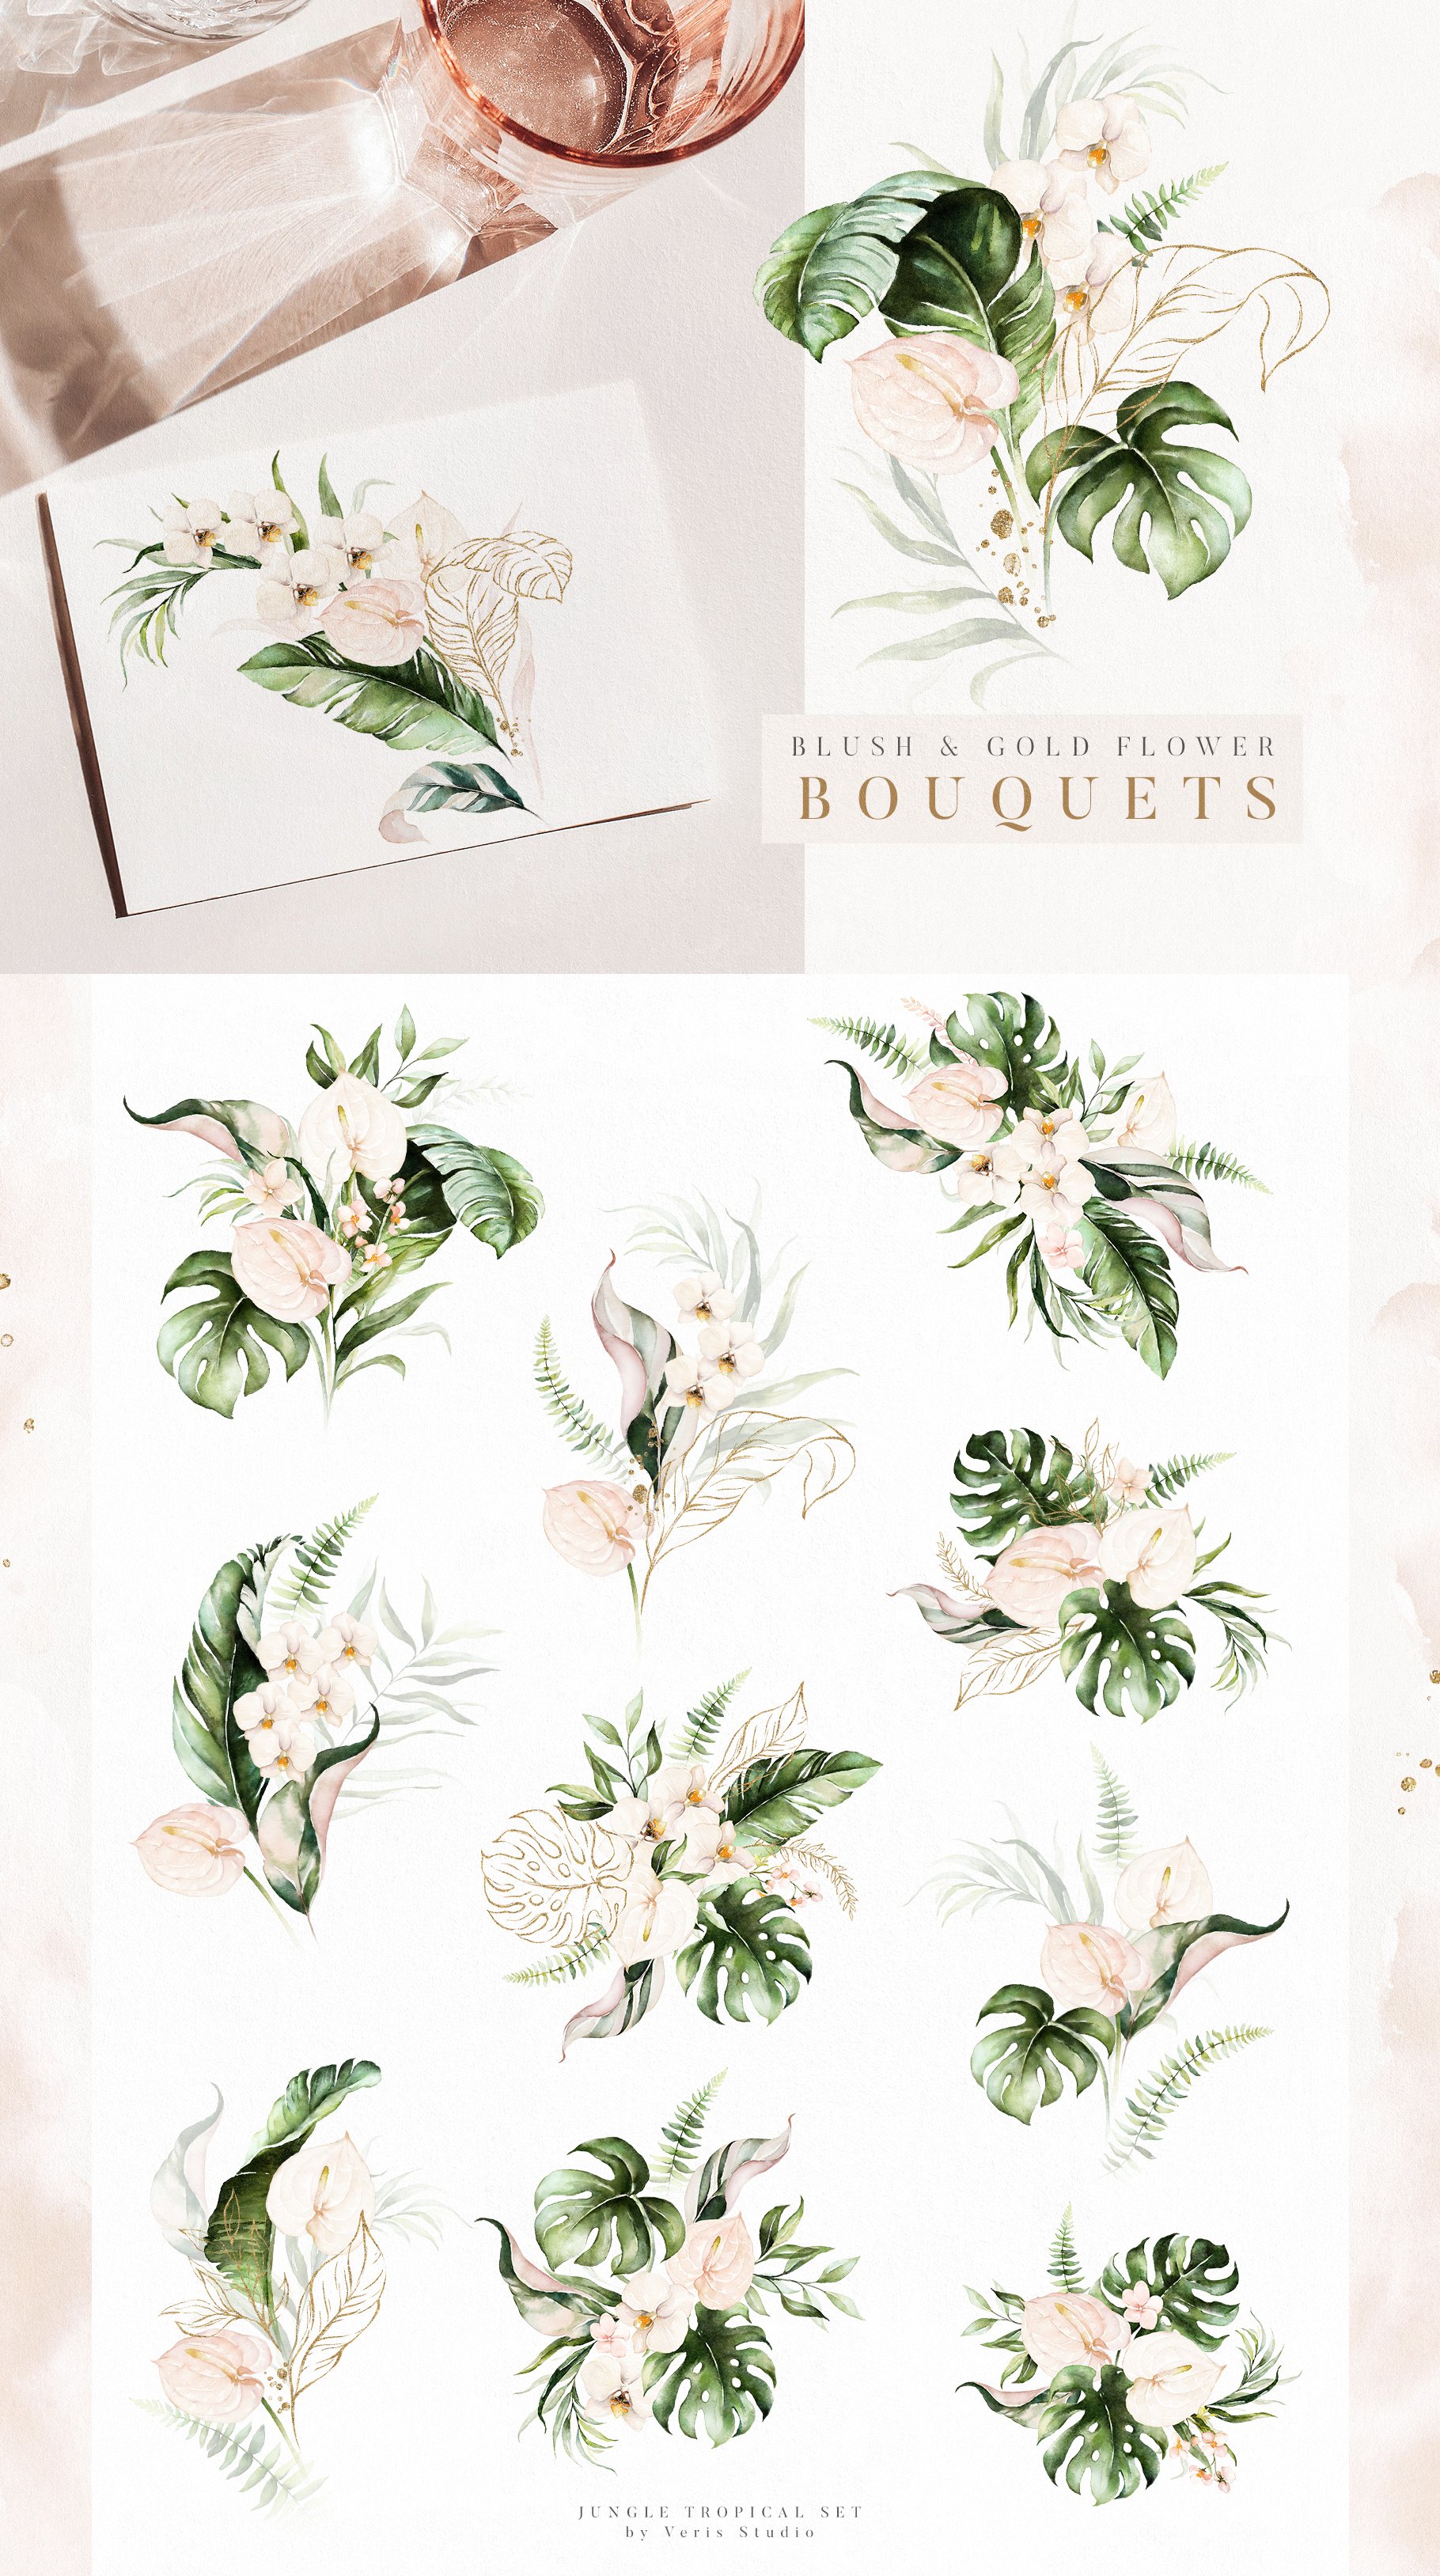 Bunch of watercolor flowers on a white background.